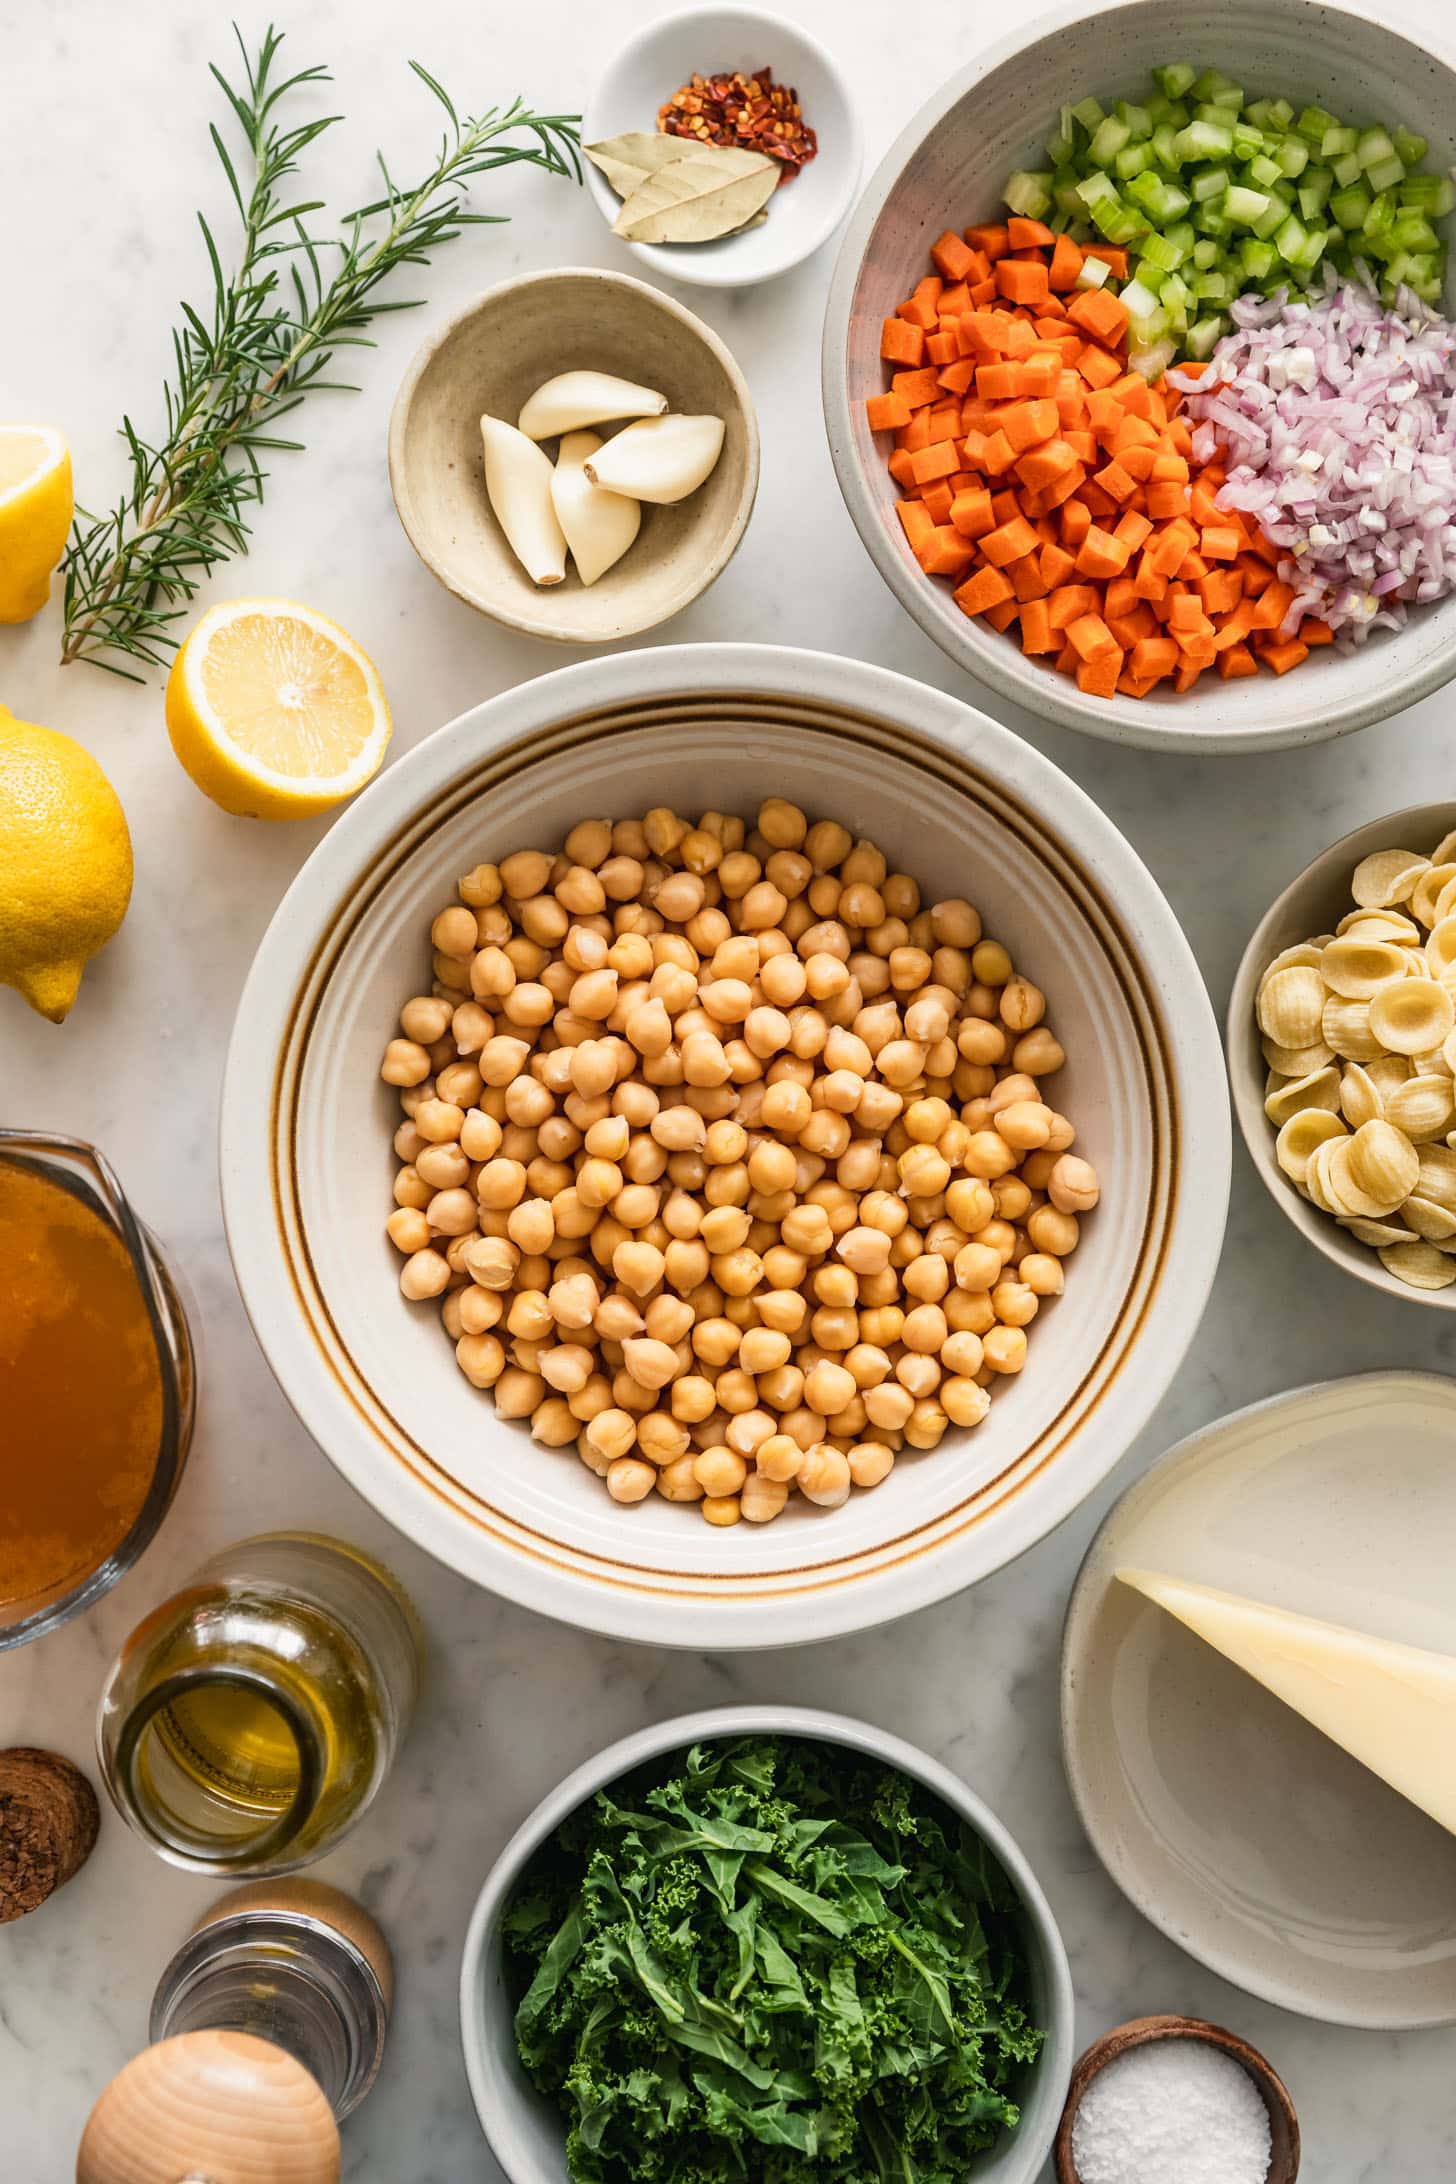 Chickpeas, veggies, pasta, Parmesan, and spices in white bowls next to lemons and rosemary on a white marble counter.